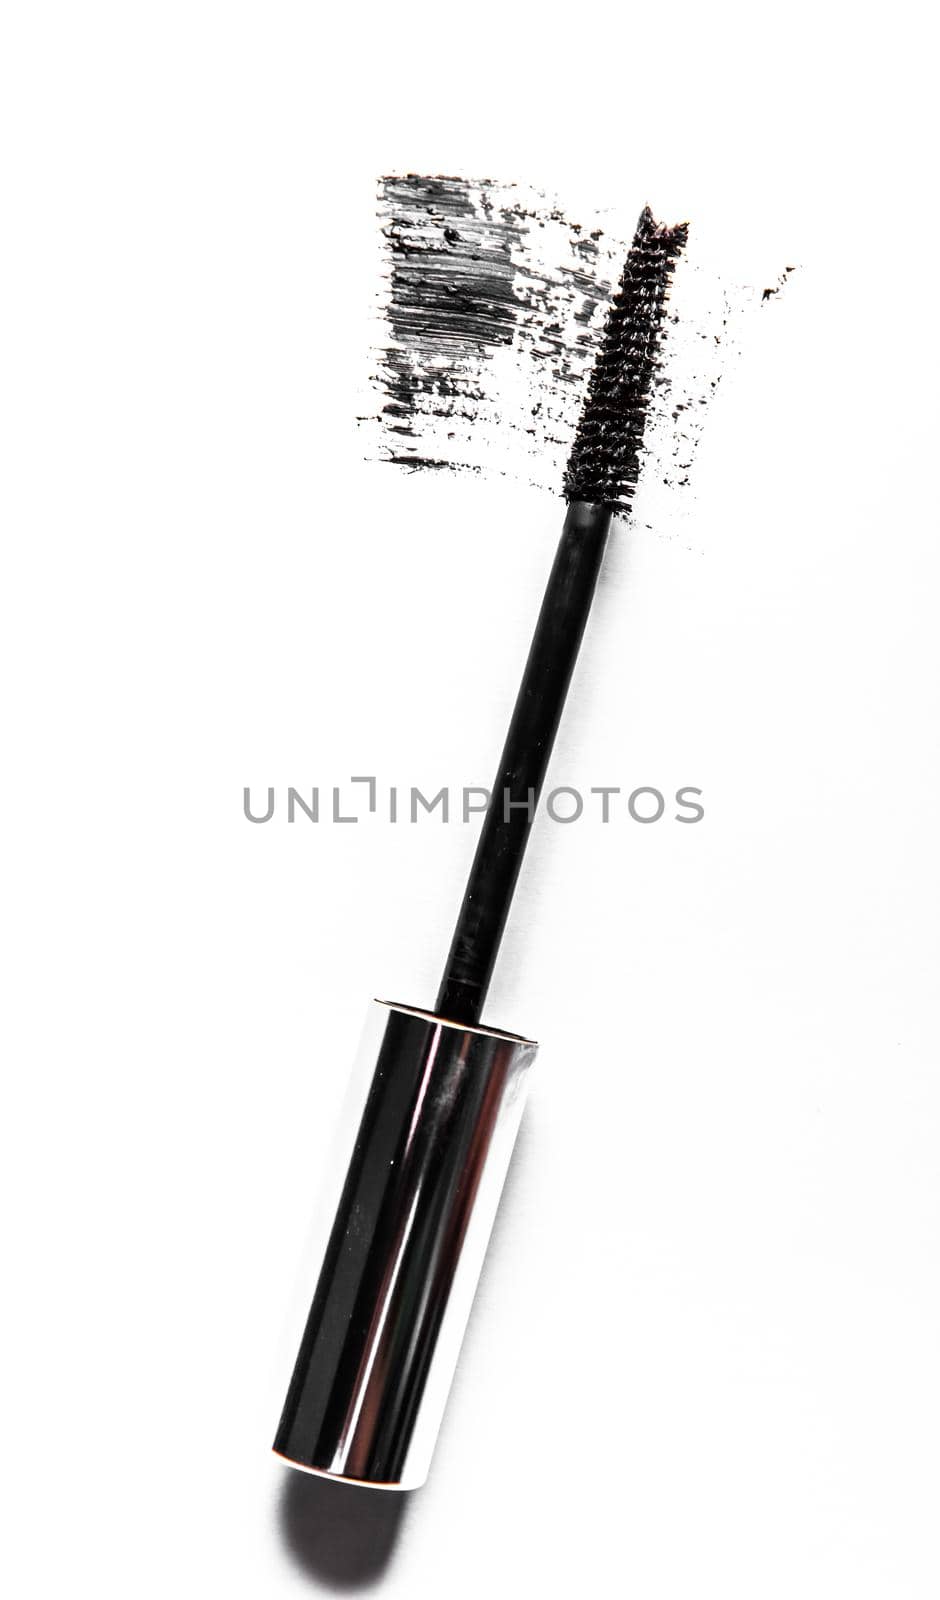 Black mascara brush stroke close-up isolated on white background by Anneleven